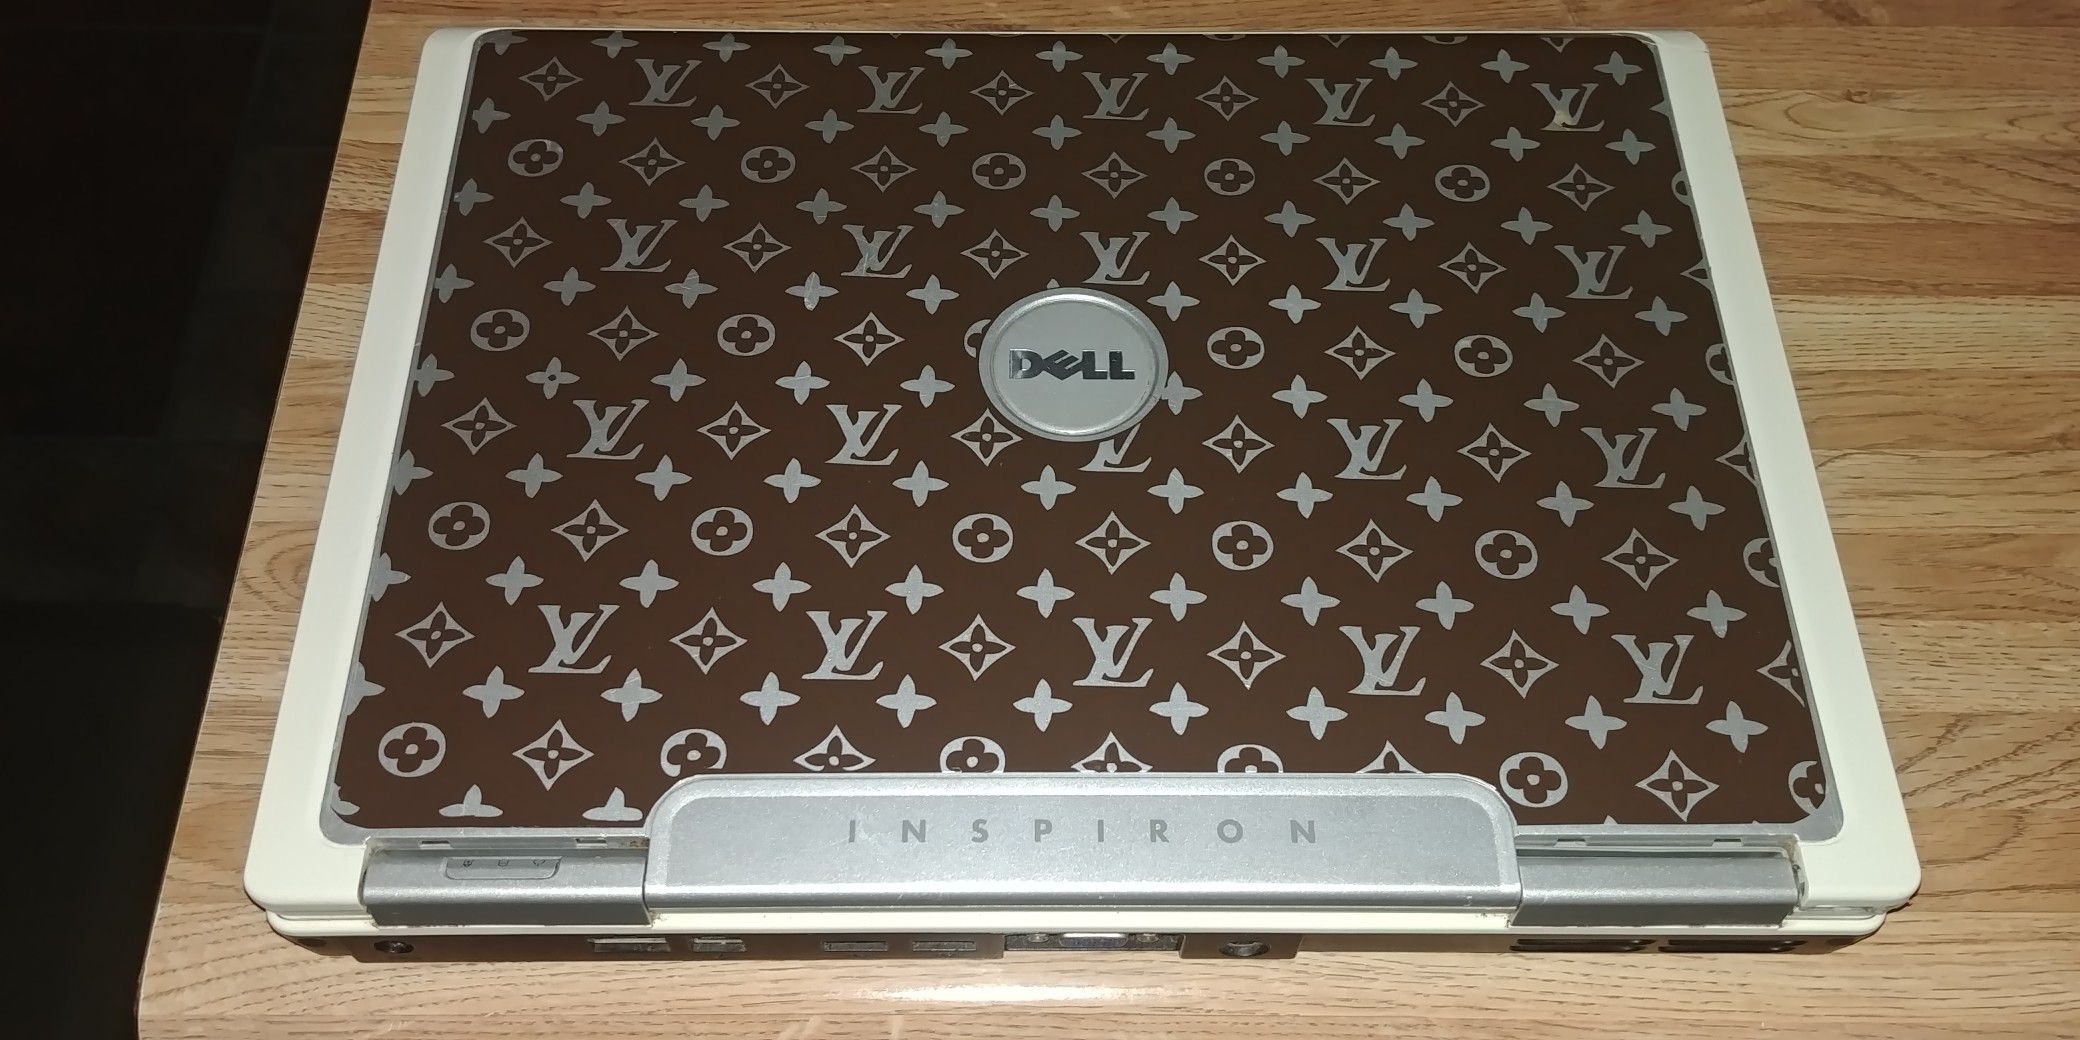 Price Dropped Dell Inspiron ET505 Windows 10 Home